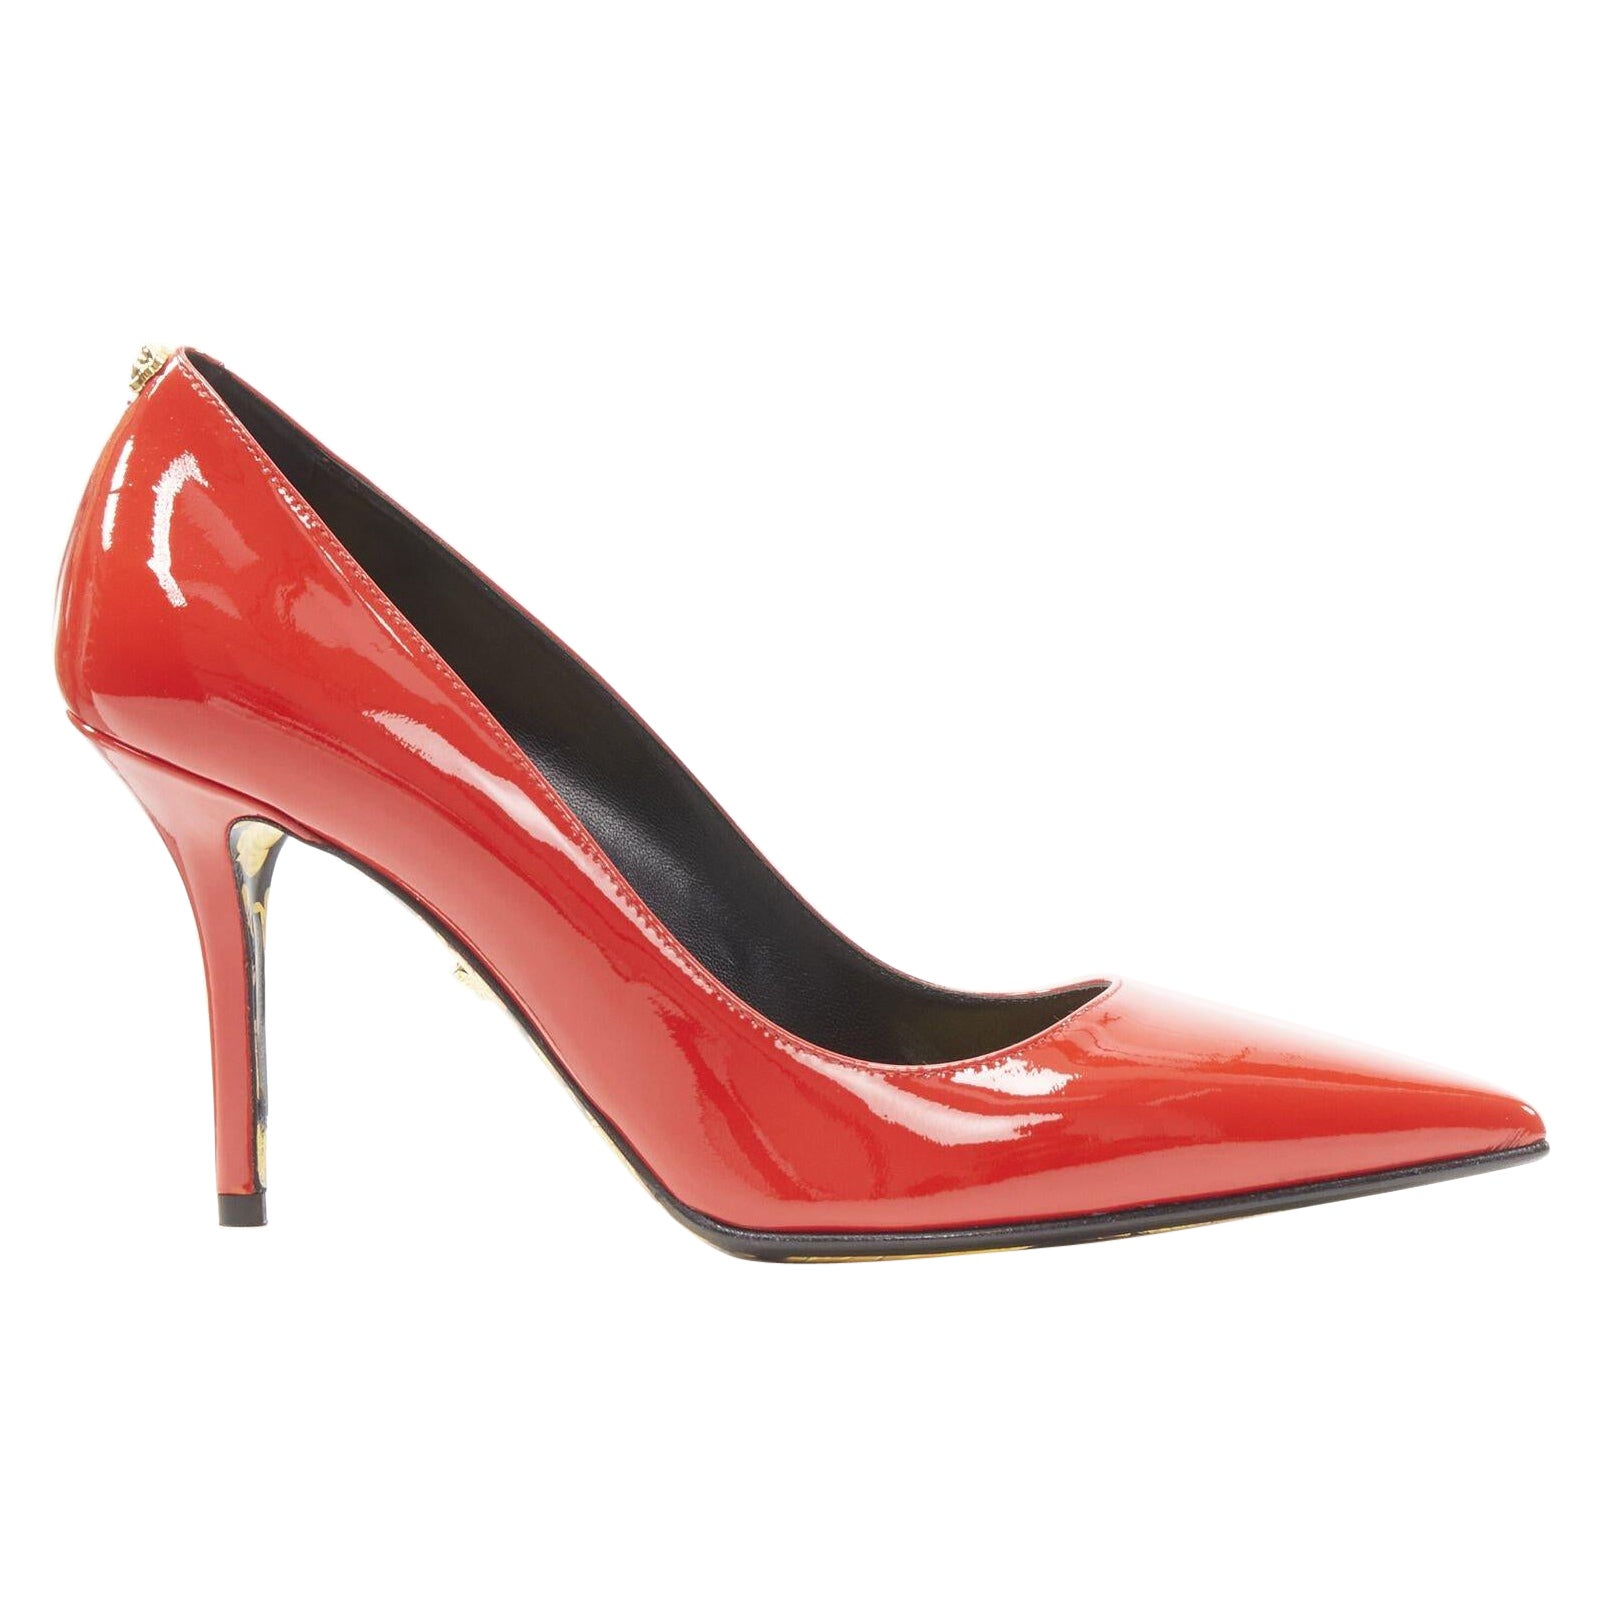 VERSACE Hibiscus Barocco gold sole red patent Medusa stud pump EU37.5 US7.5 For Sale